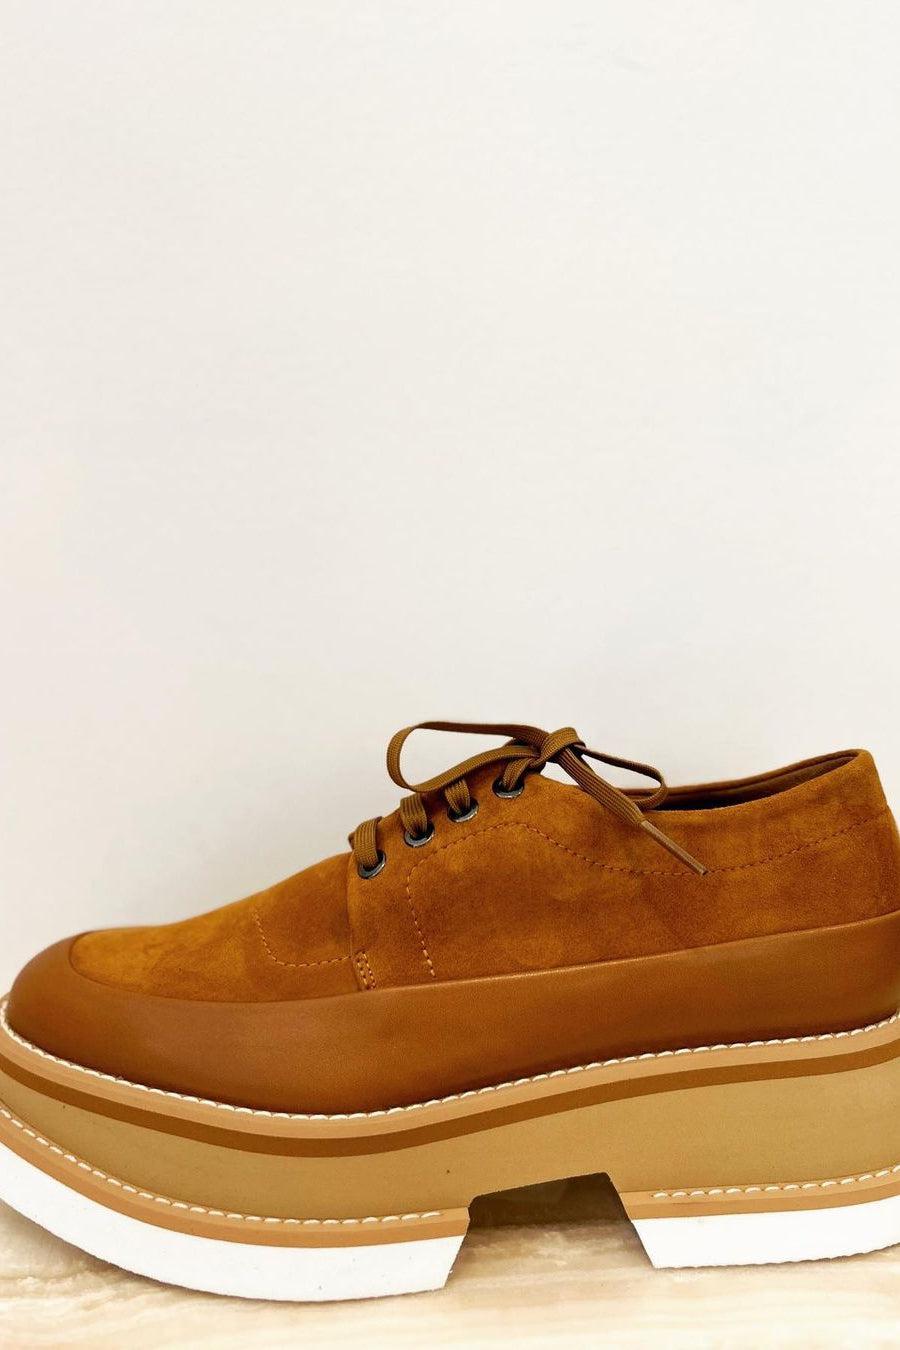 BECK RUST CALF SHOES-Shoes-Clergerie-Debs Boutique